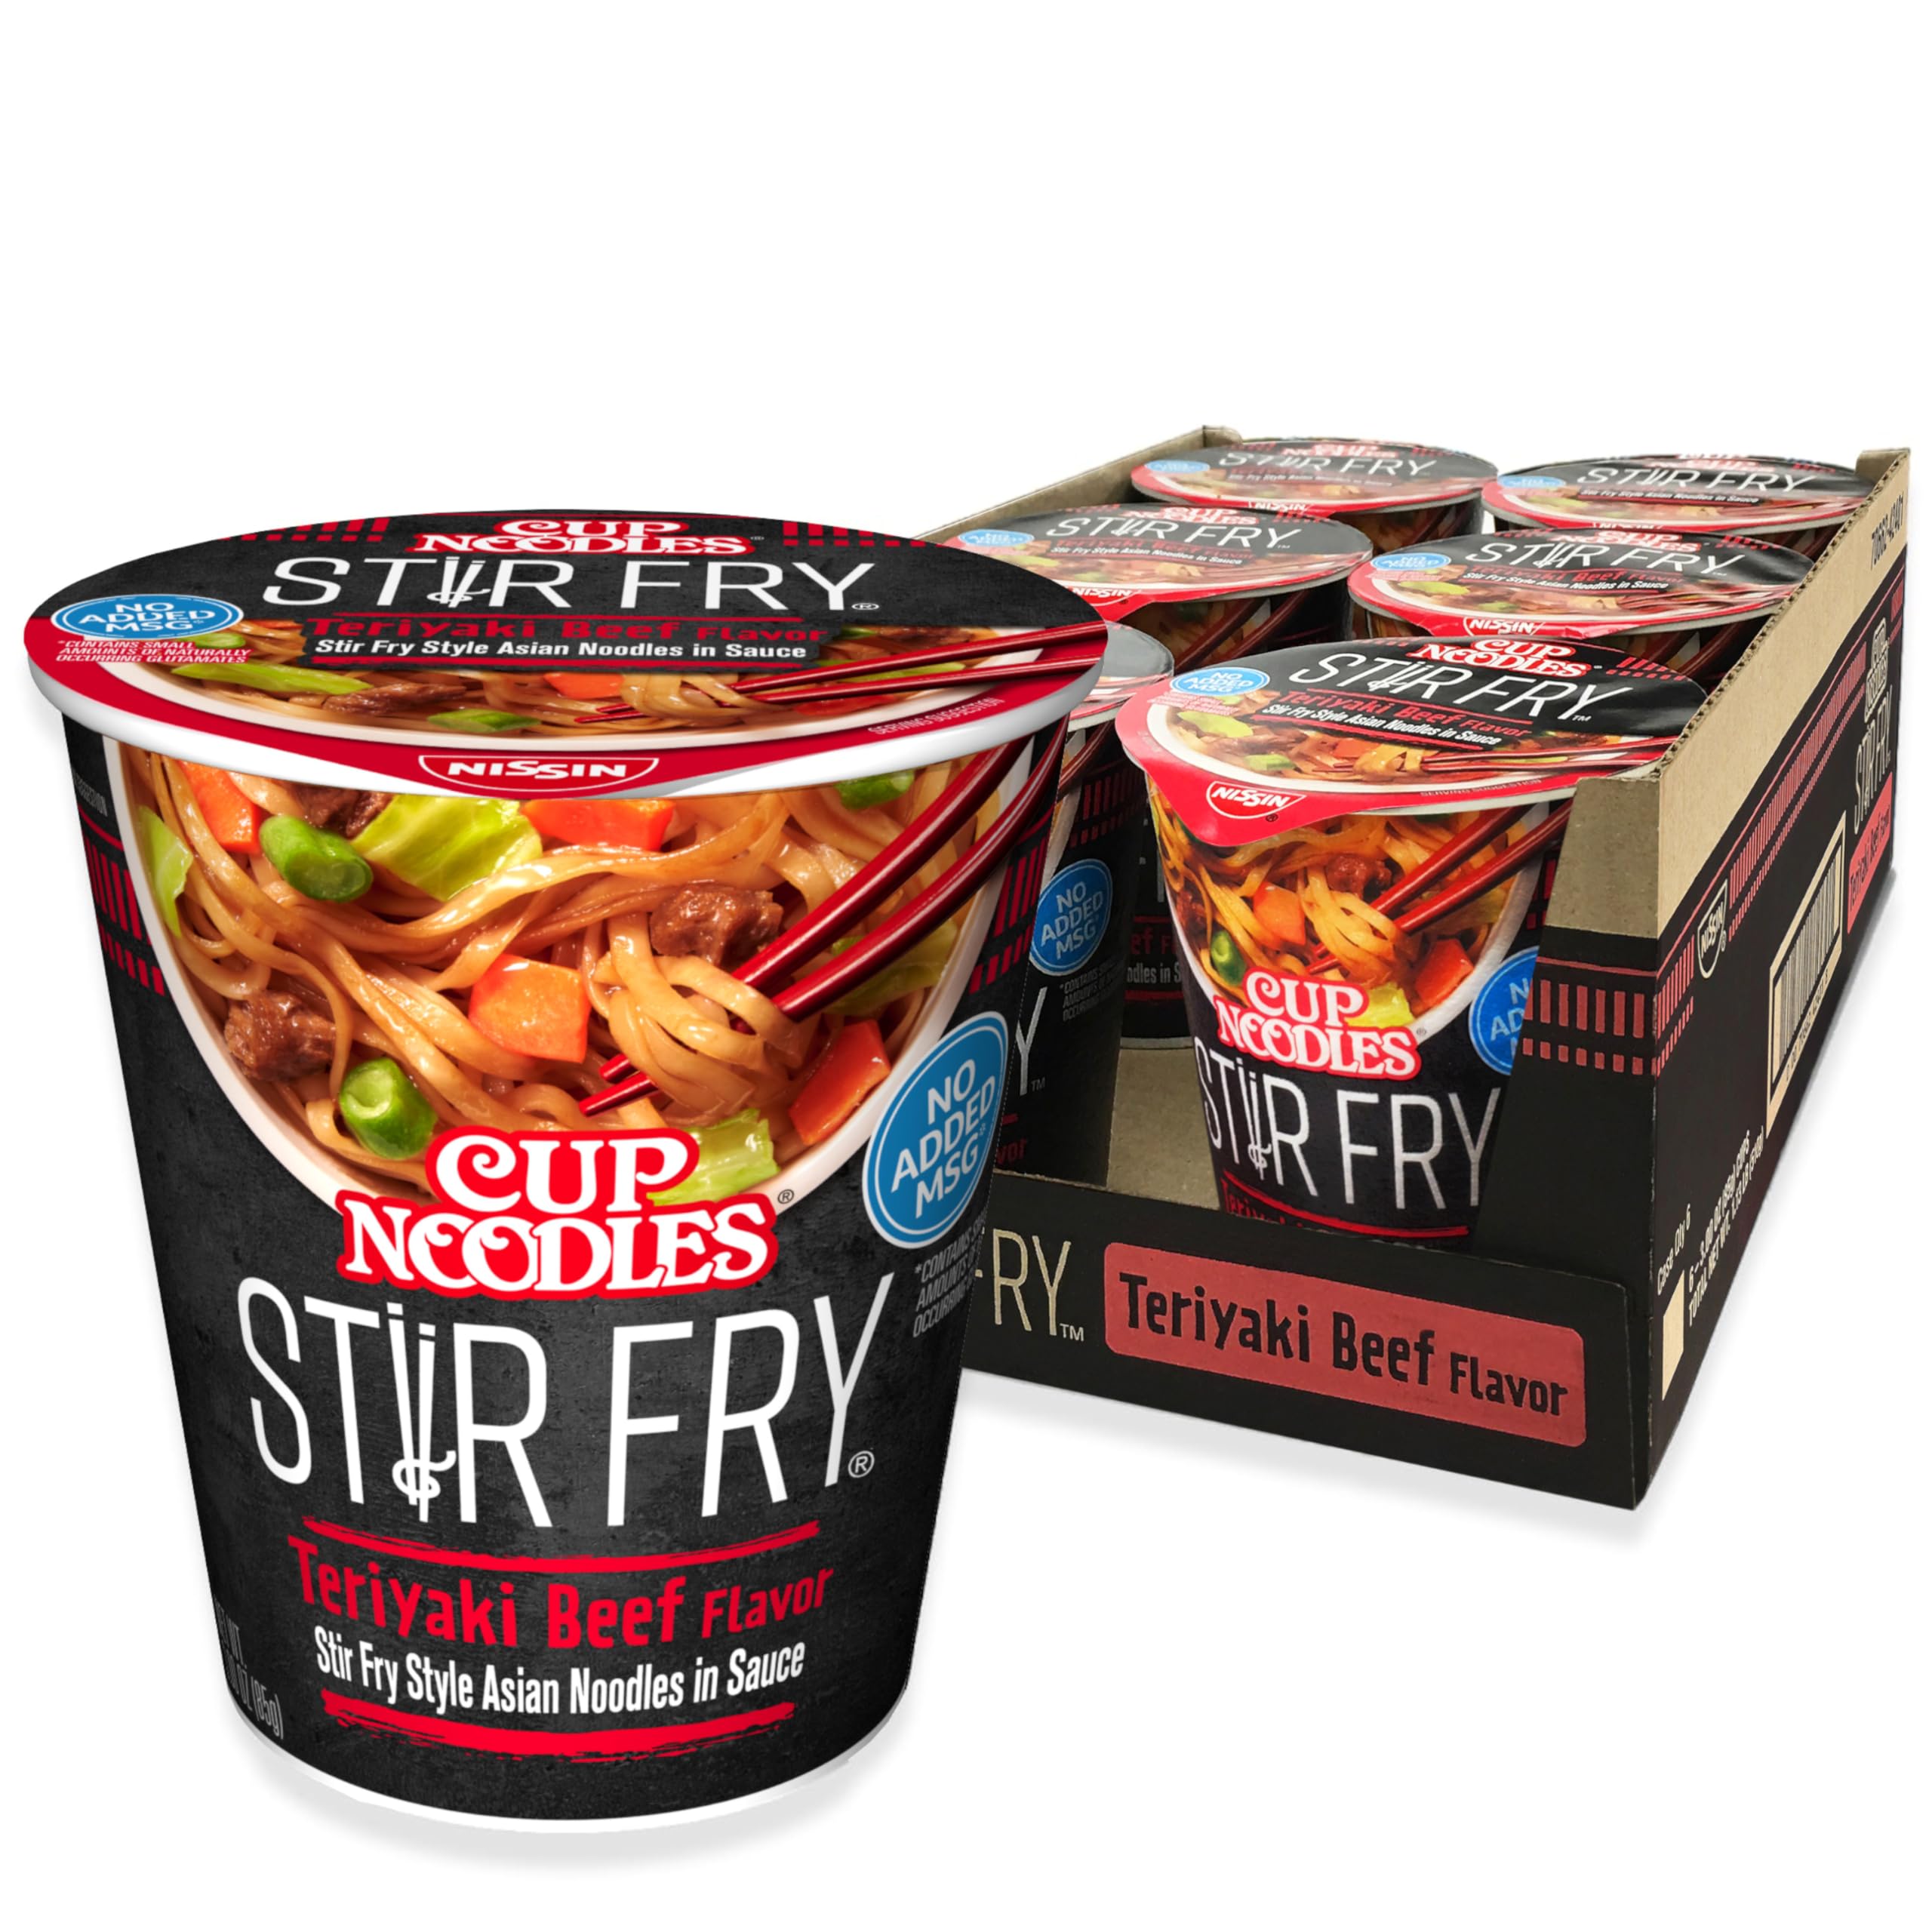 6-Pack 3-Oz Nissin Stir Fry Cup Noodles in Sauce (Teriyaki Beef) $5.71 w/S&S + Free Shipping w/ Prime or on $35+